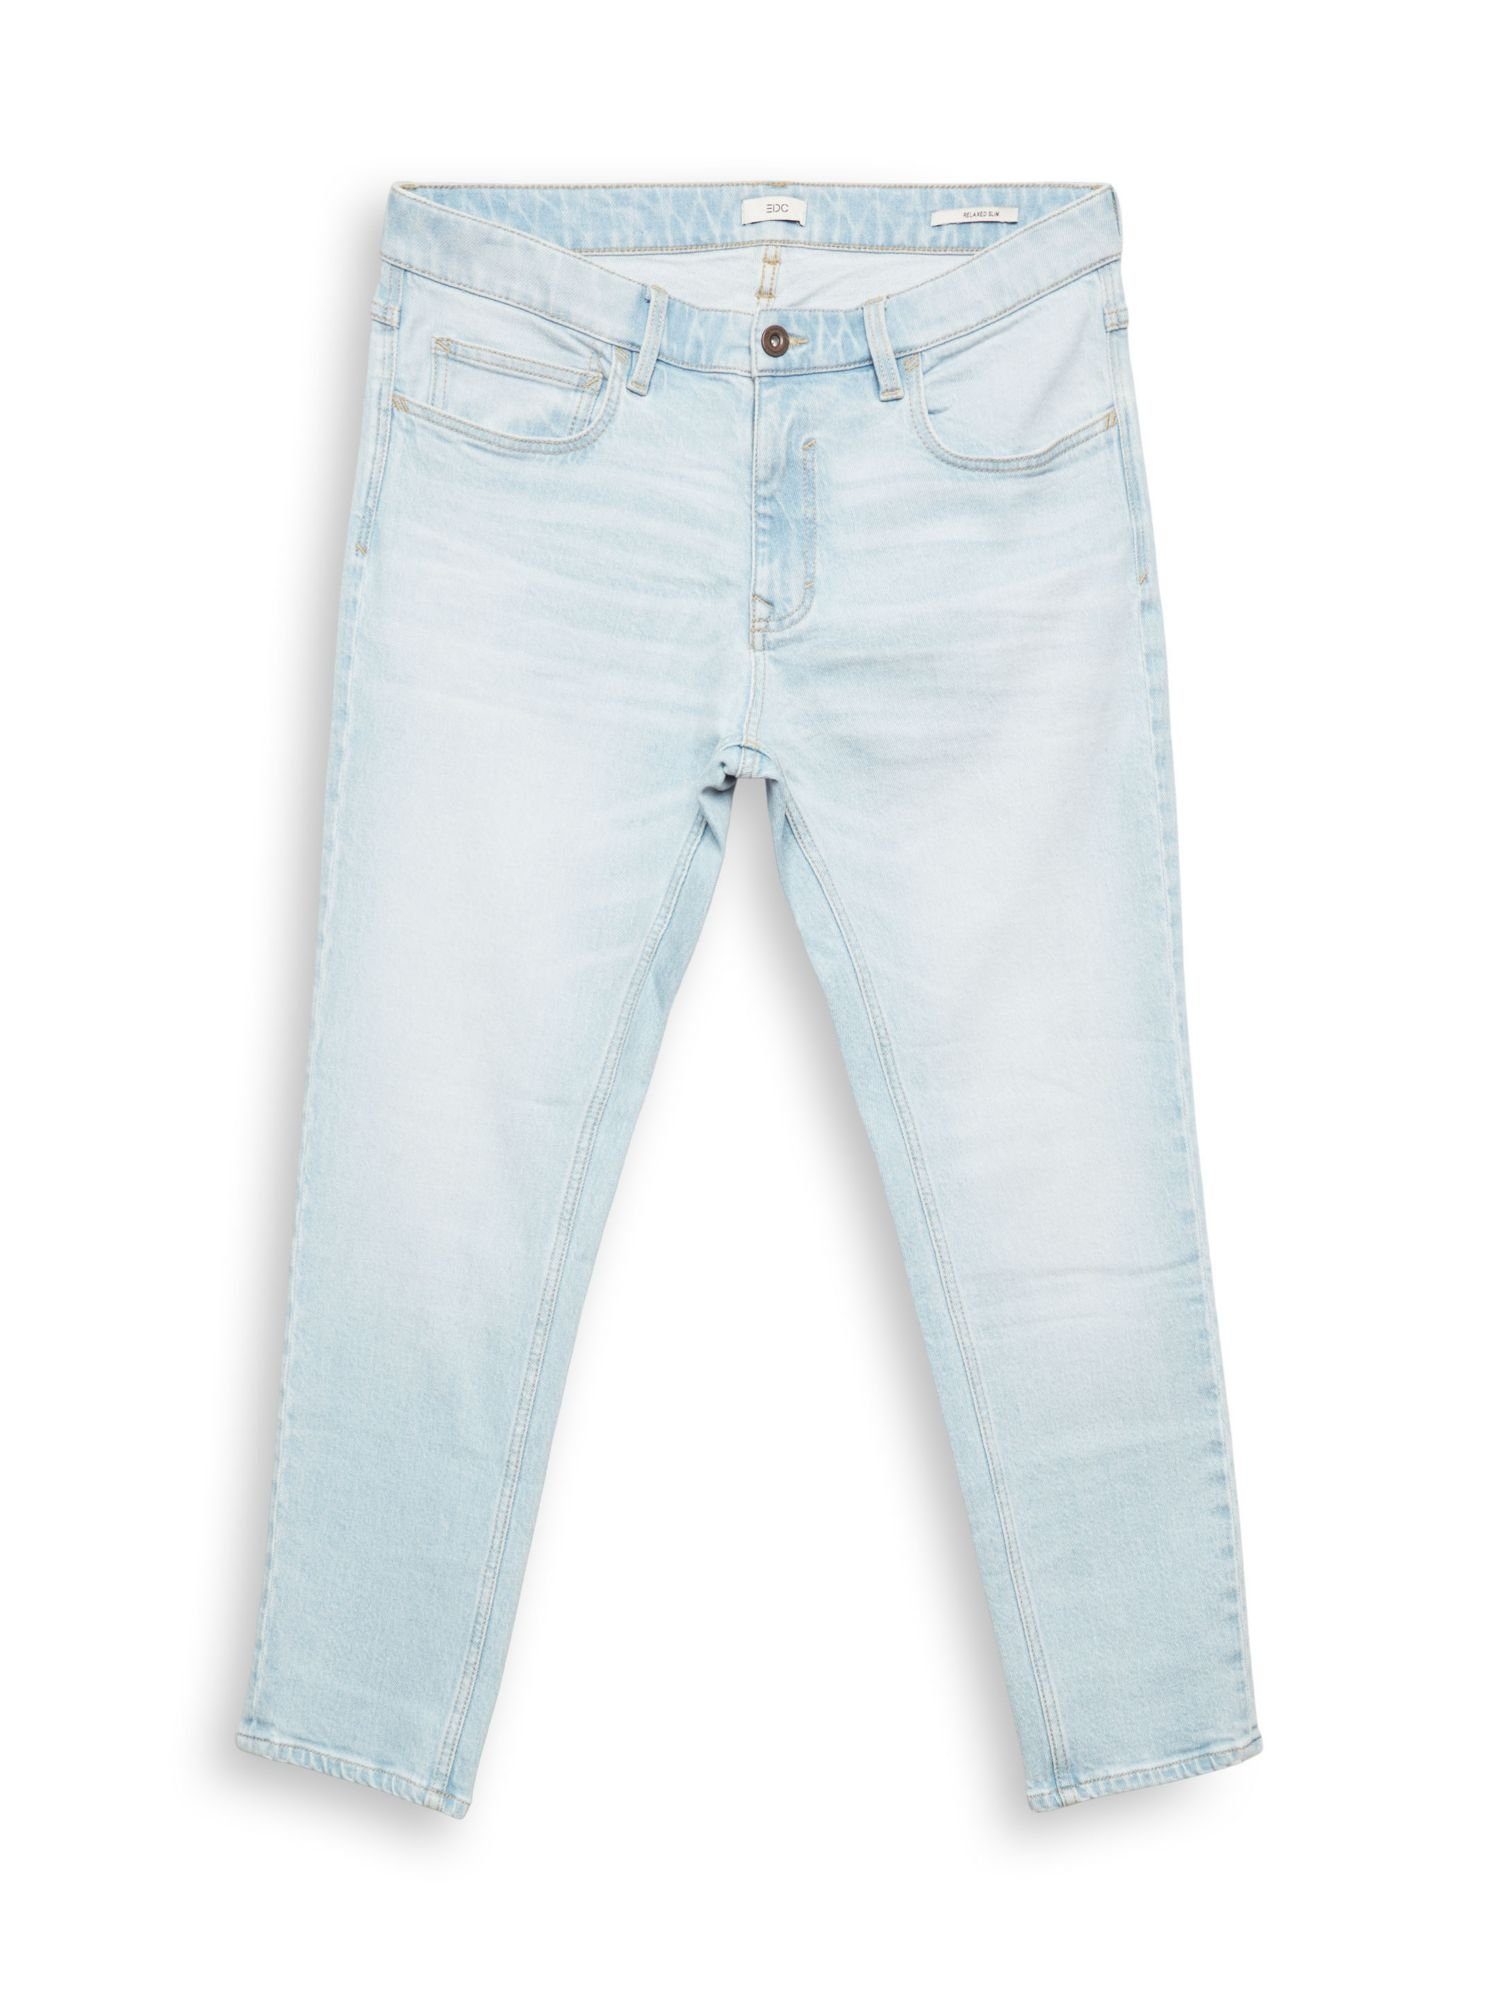 Esprit BLUE by Stretch-Jeans BLEACHED edc Stretch-Jeans